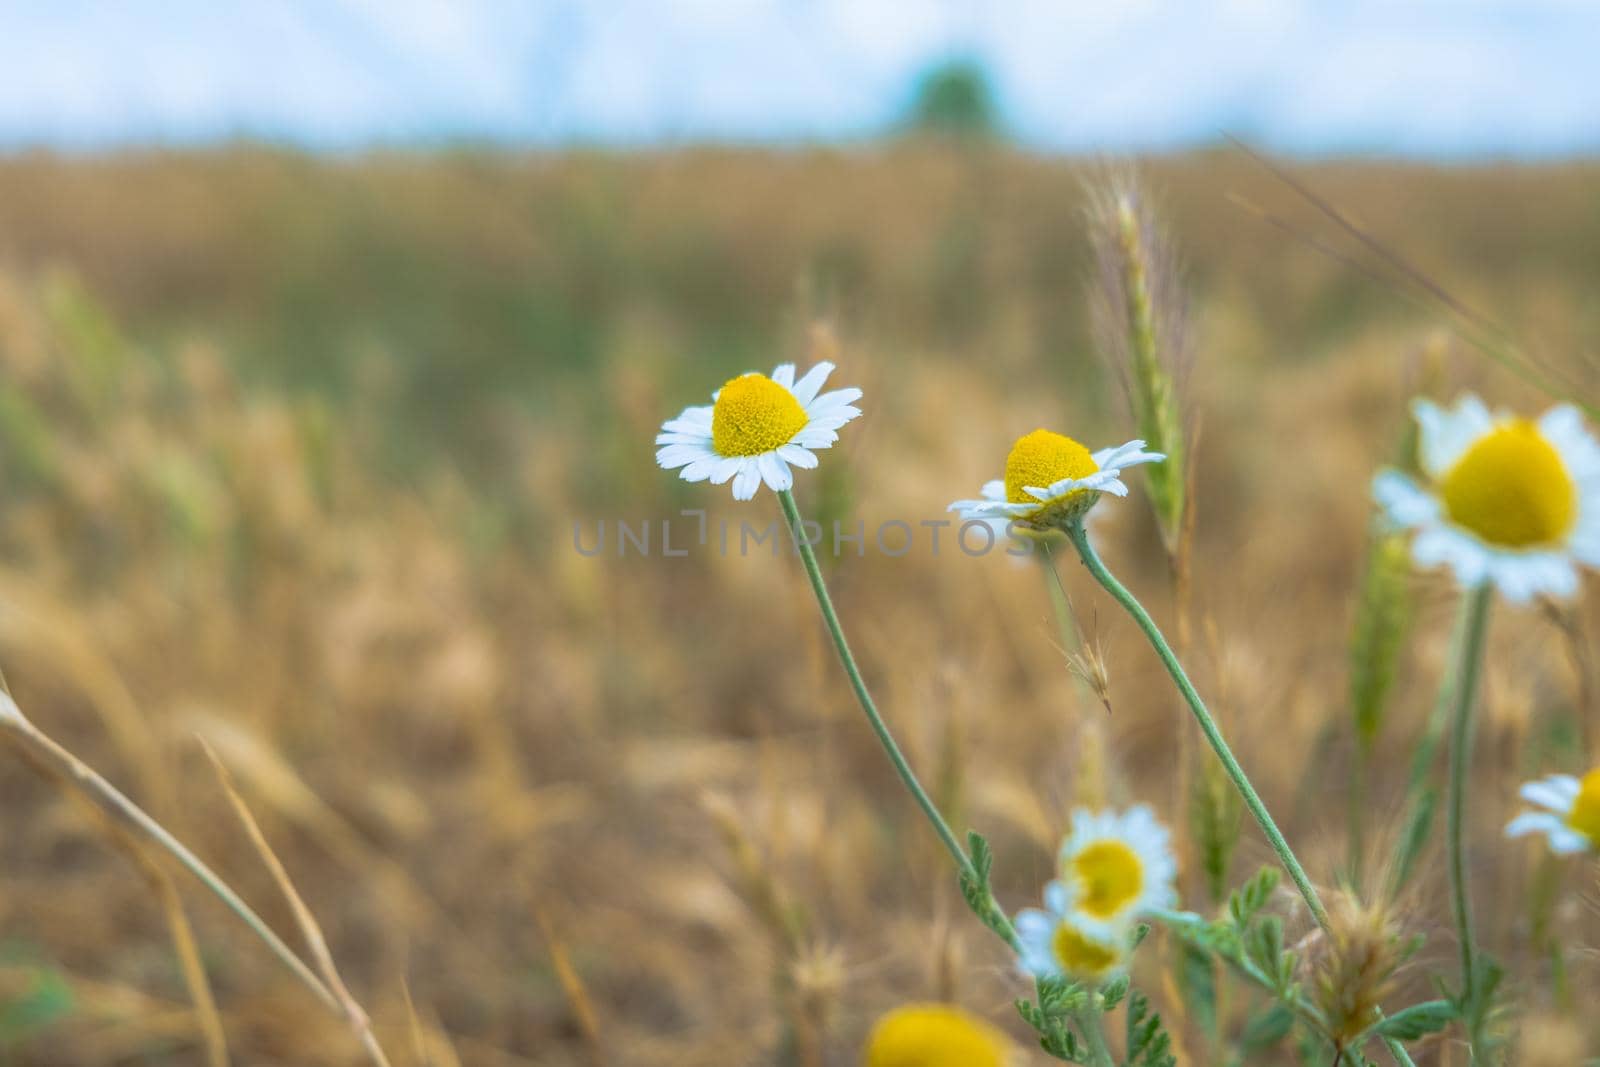 Daisies in the field. Chamomile field flowers border. Beautiful nature scene with blooming medical chamomiles